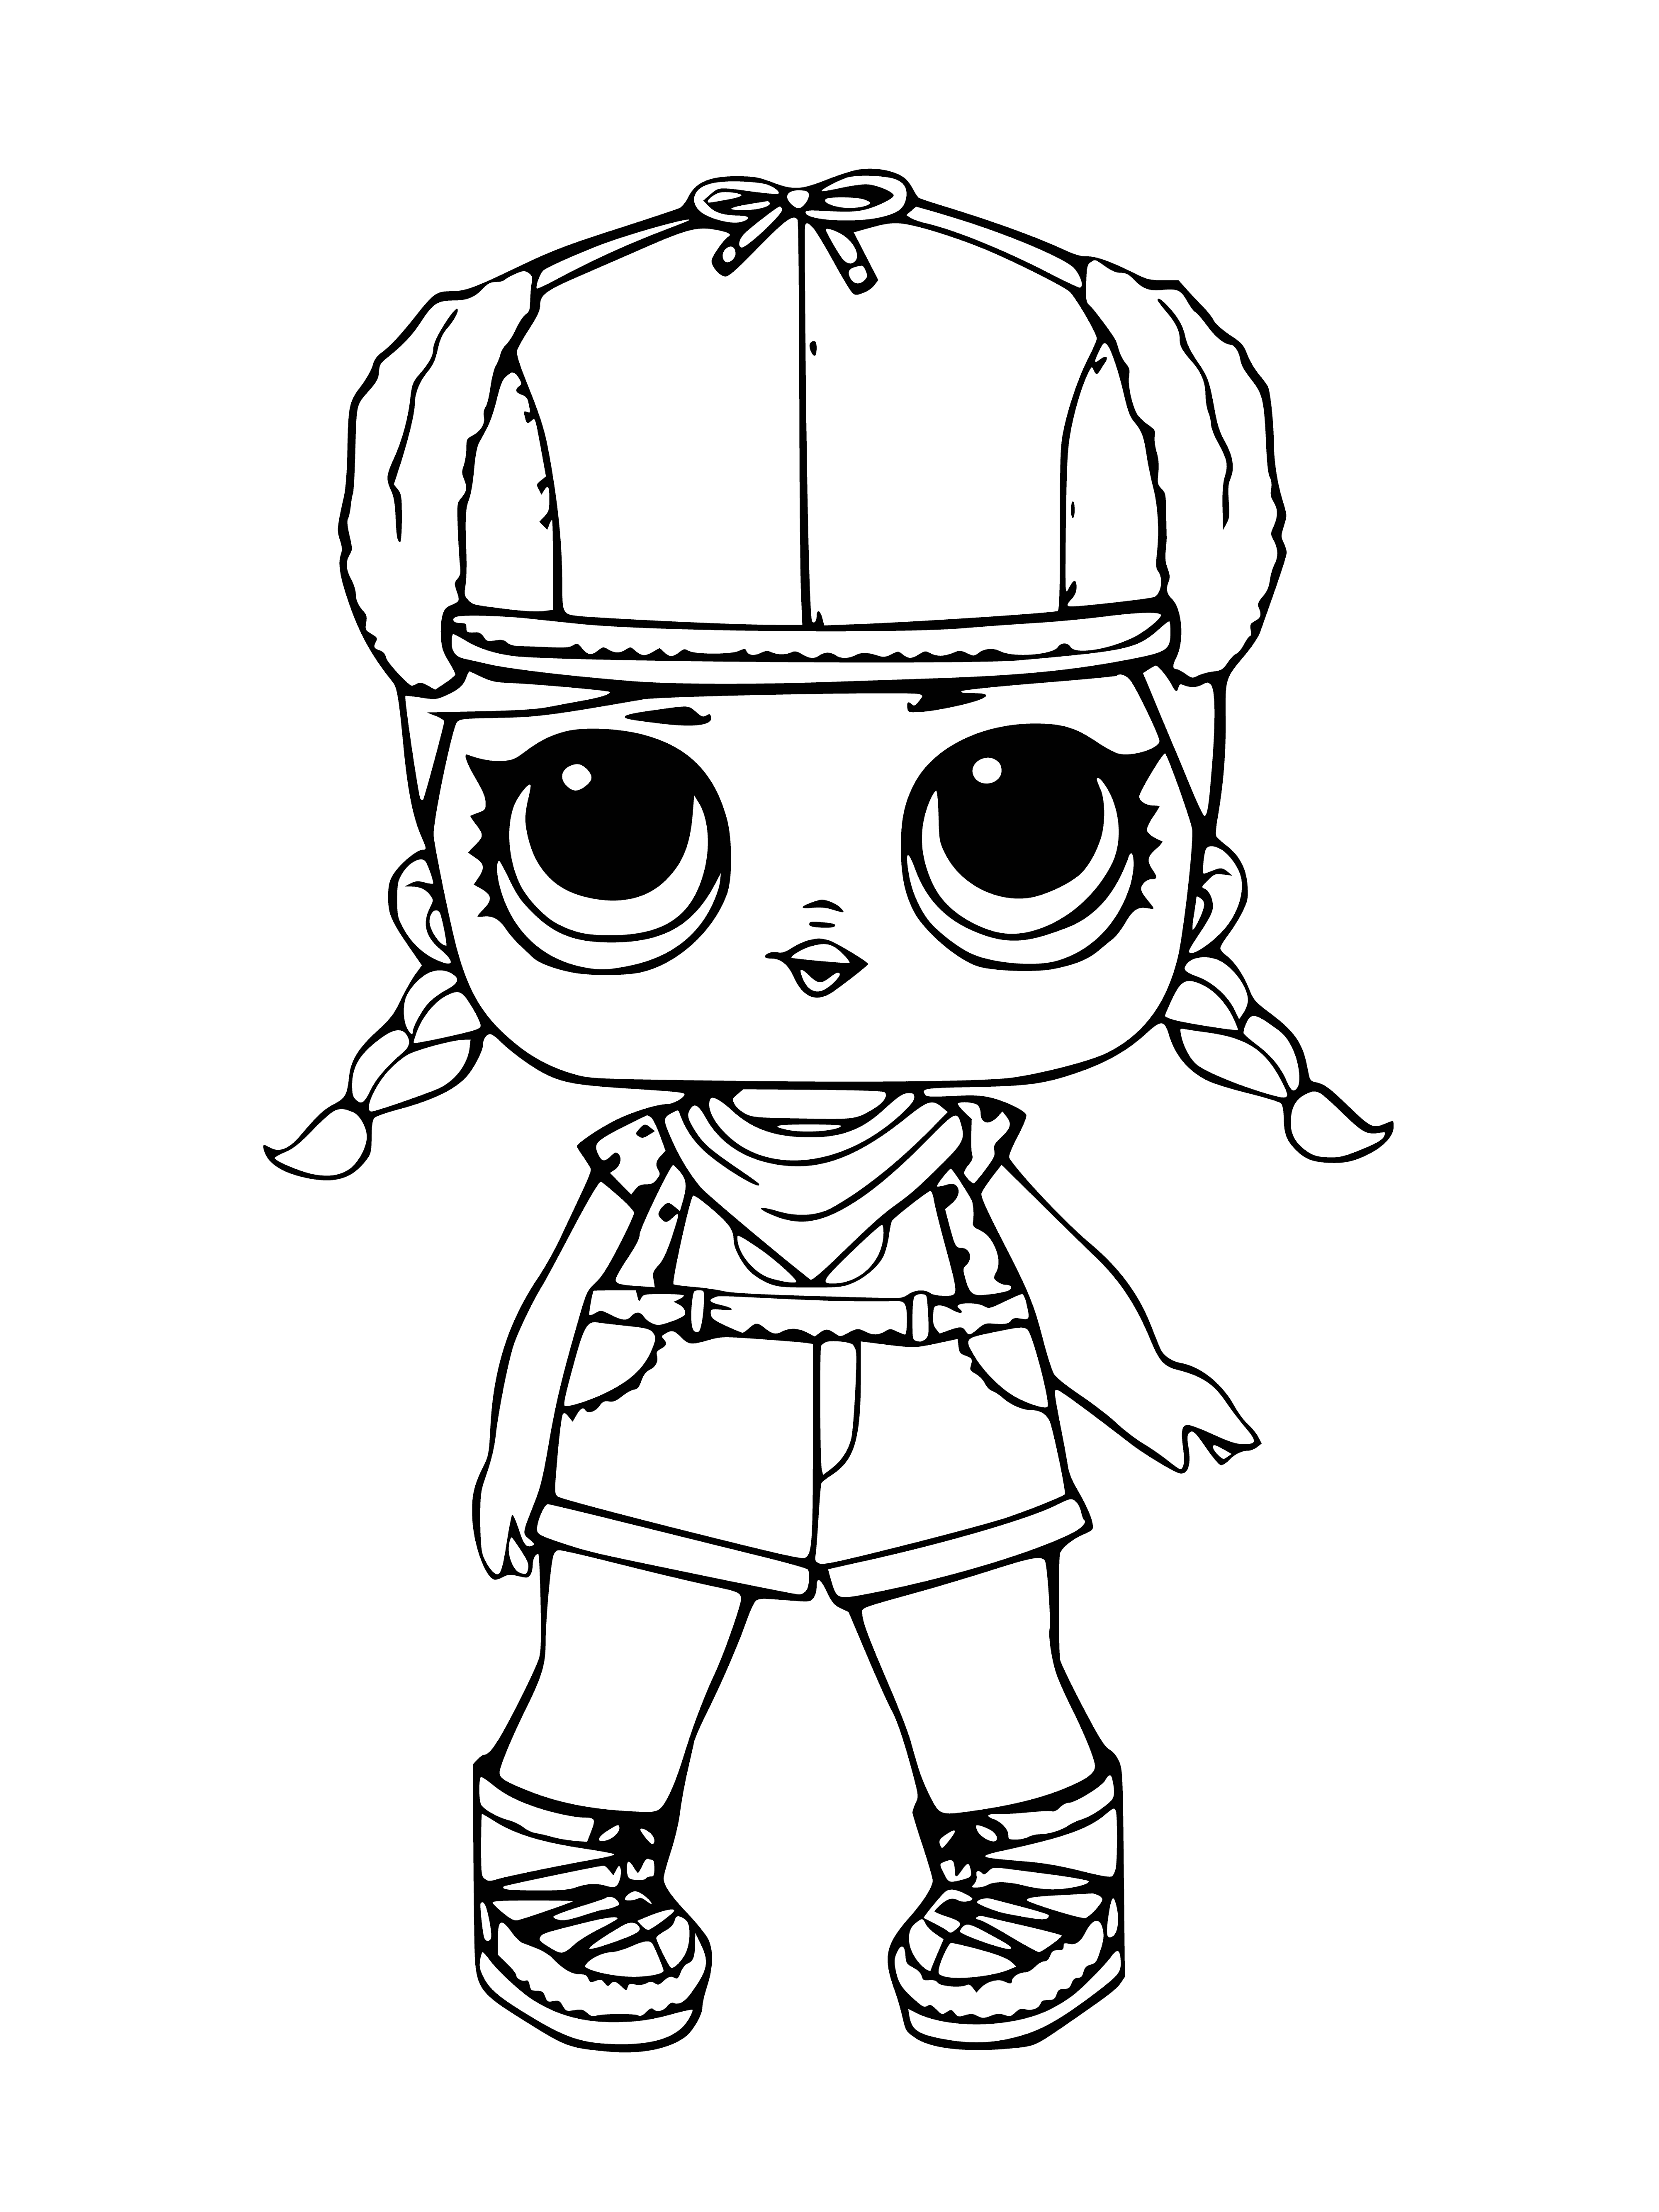 coloring page: L.O.L series 2 doll BRRR V.V. has blue hair and outfit with white fur trim, blue gloves & boots.